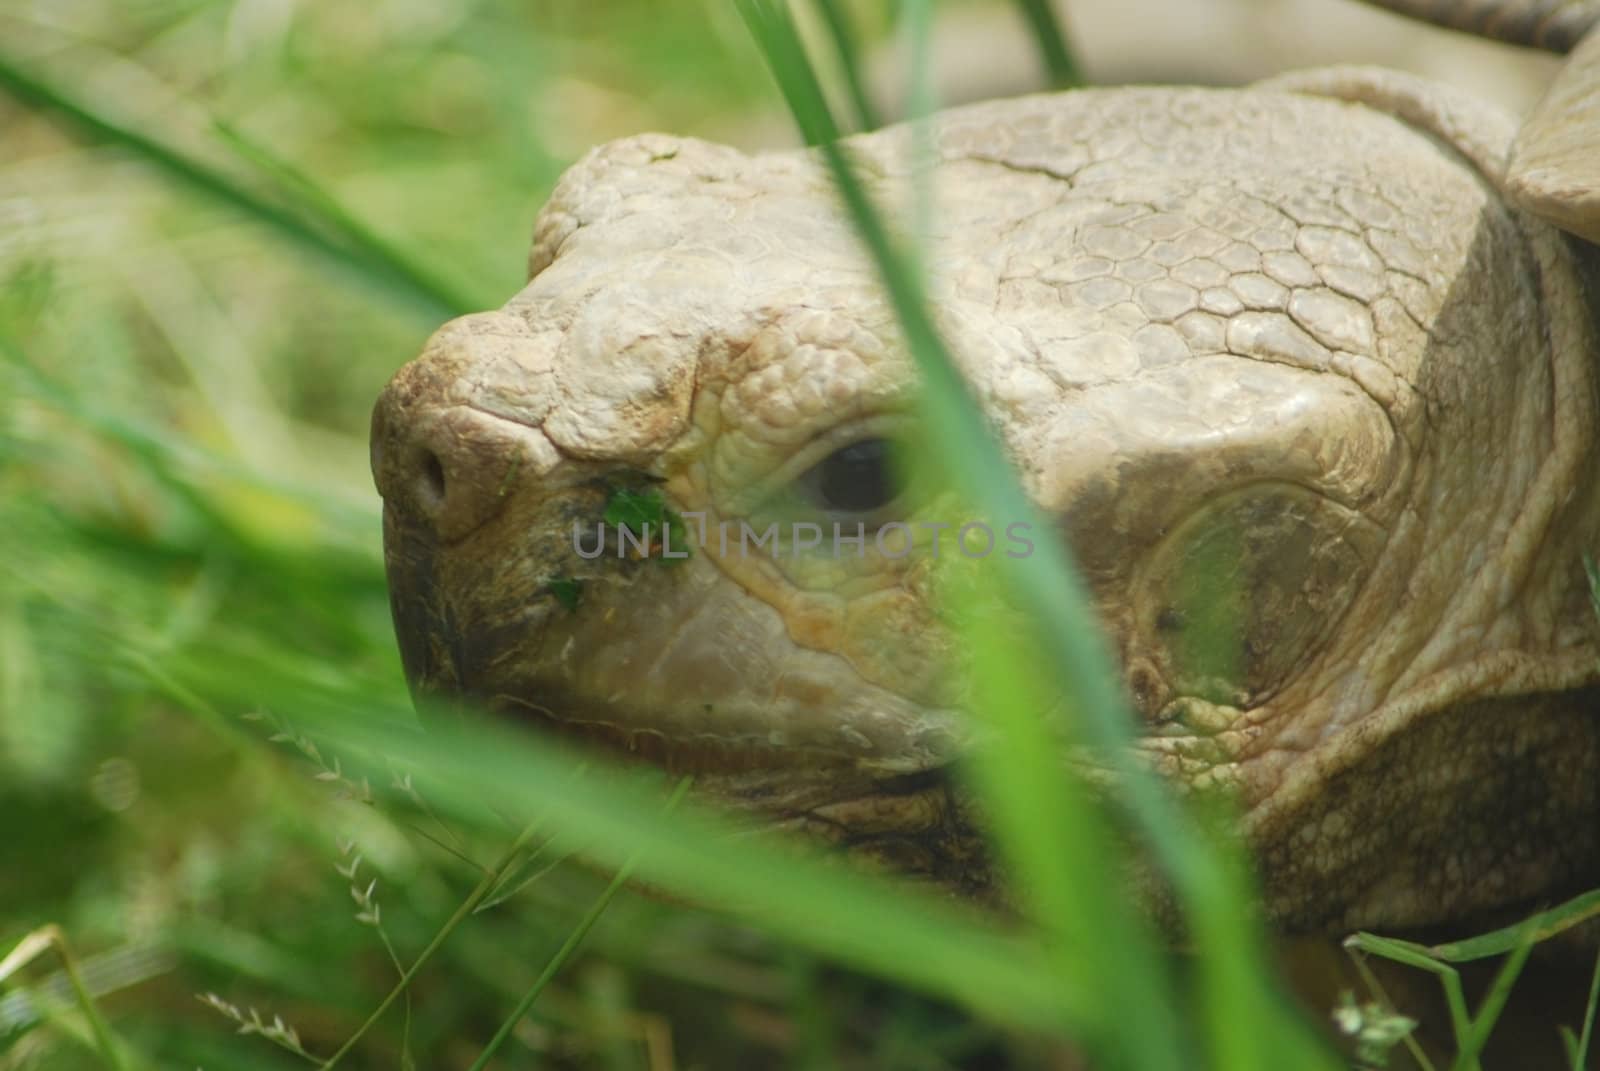  Big Galapagos turtle head, Giant tortoise close up by svtrotof